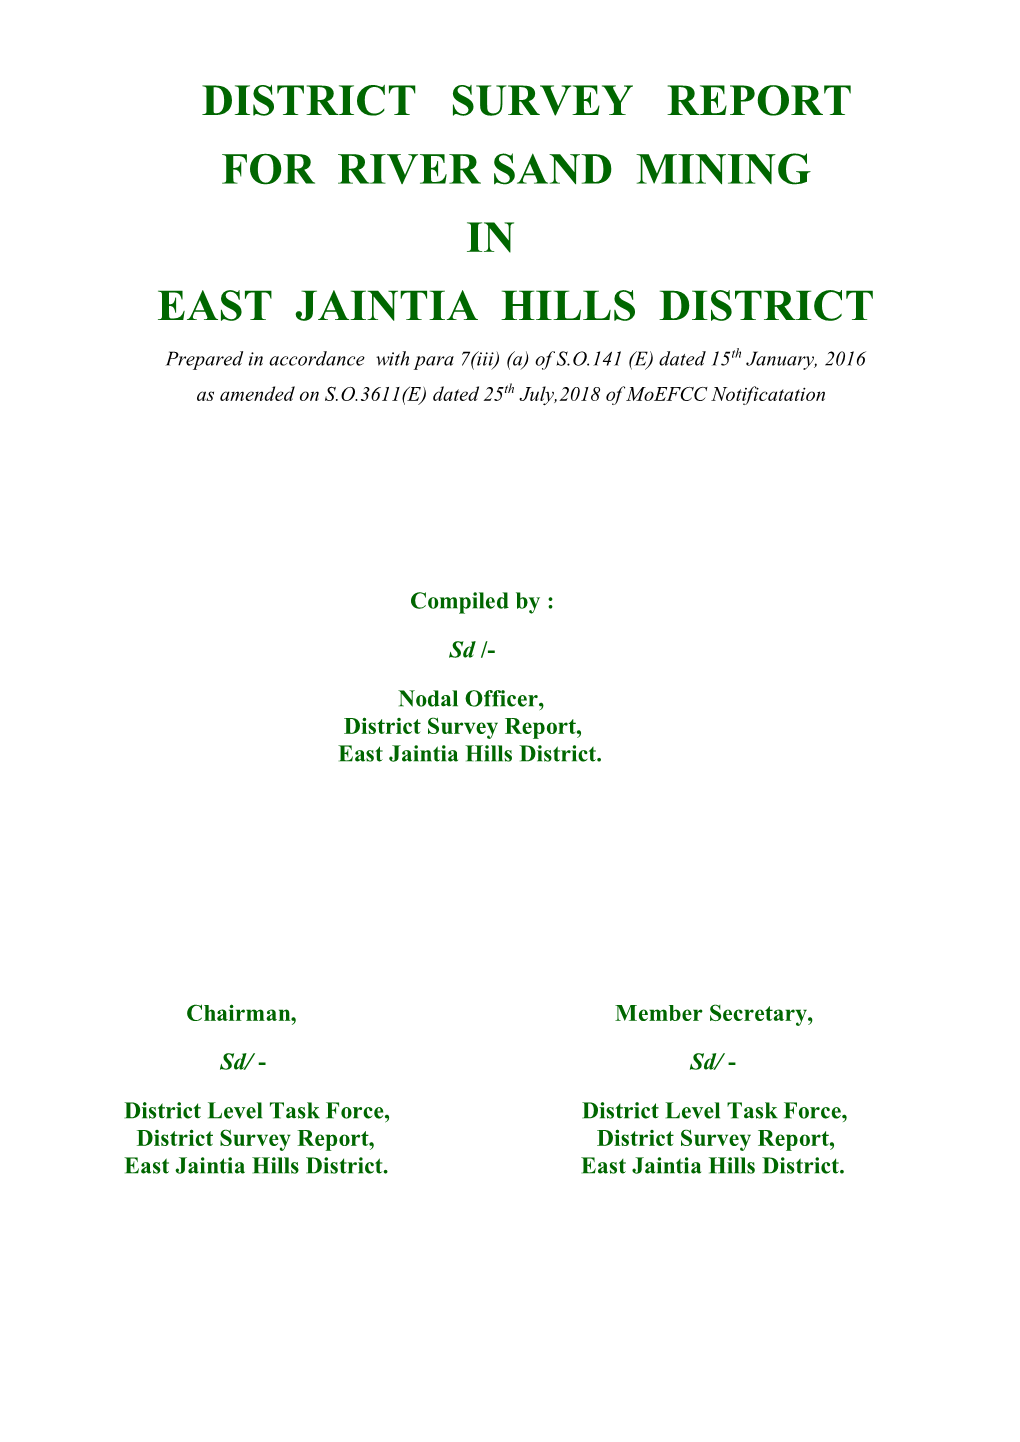 District Survey Report for River Sand Mining in East Jaintia Hills District